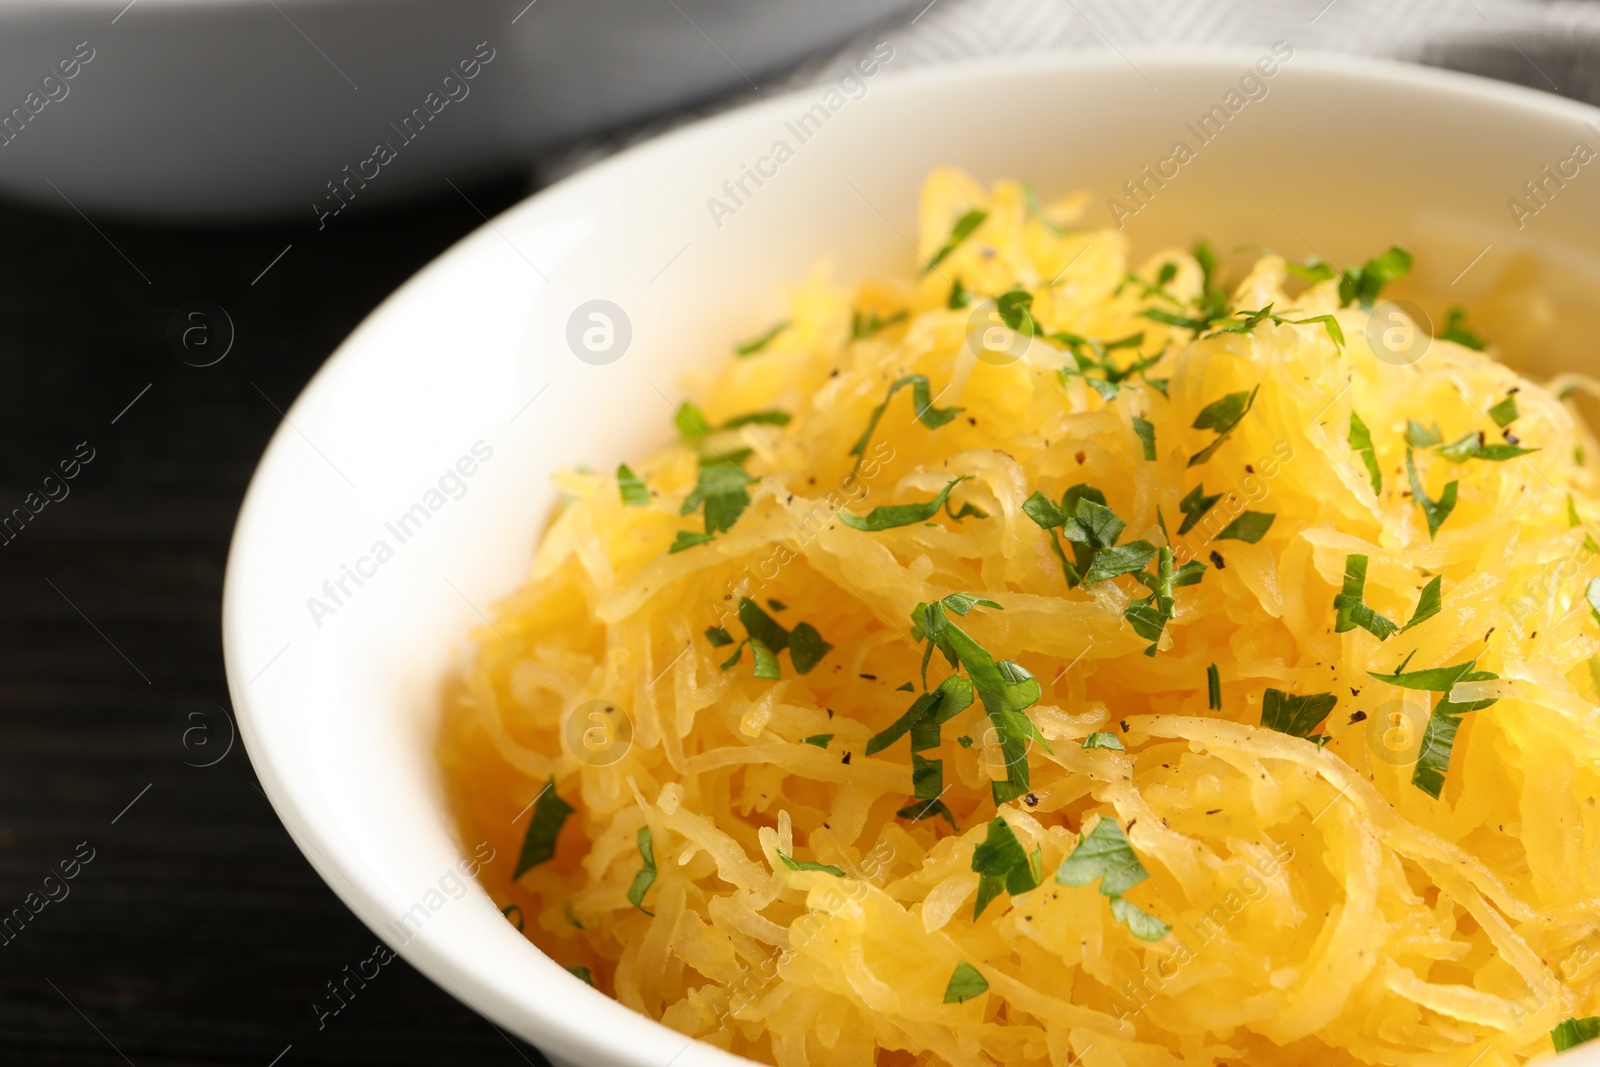 Photo of Bowl with cooked spaghetti squash on table, closeup